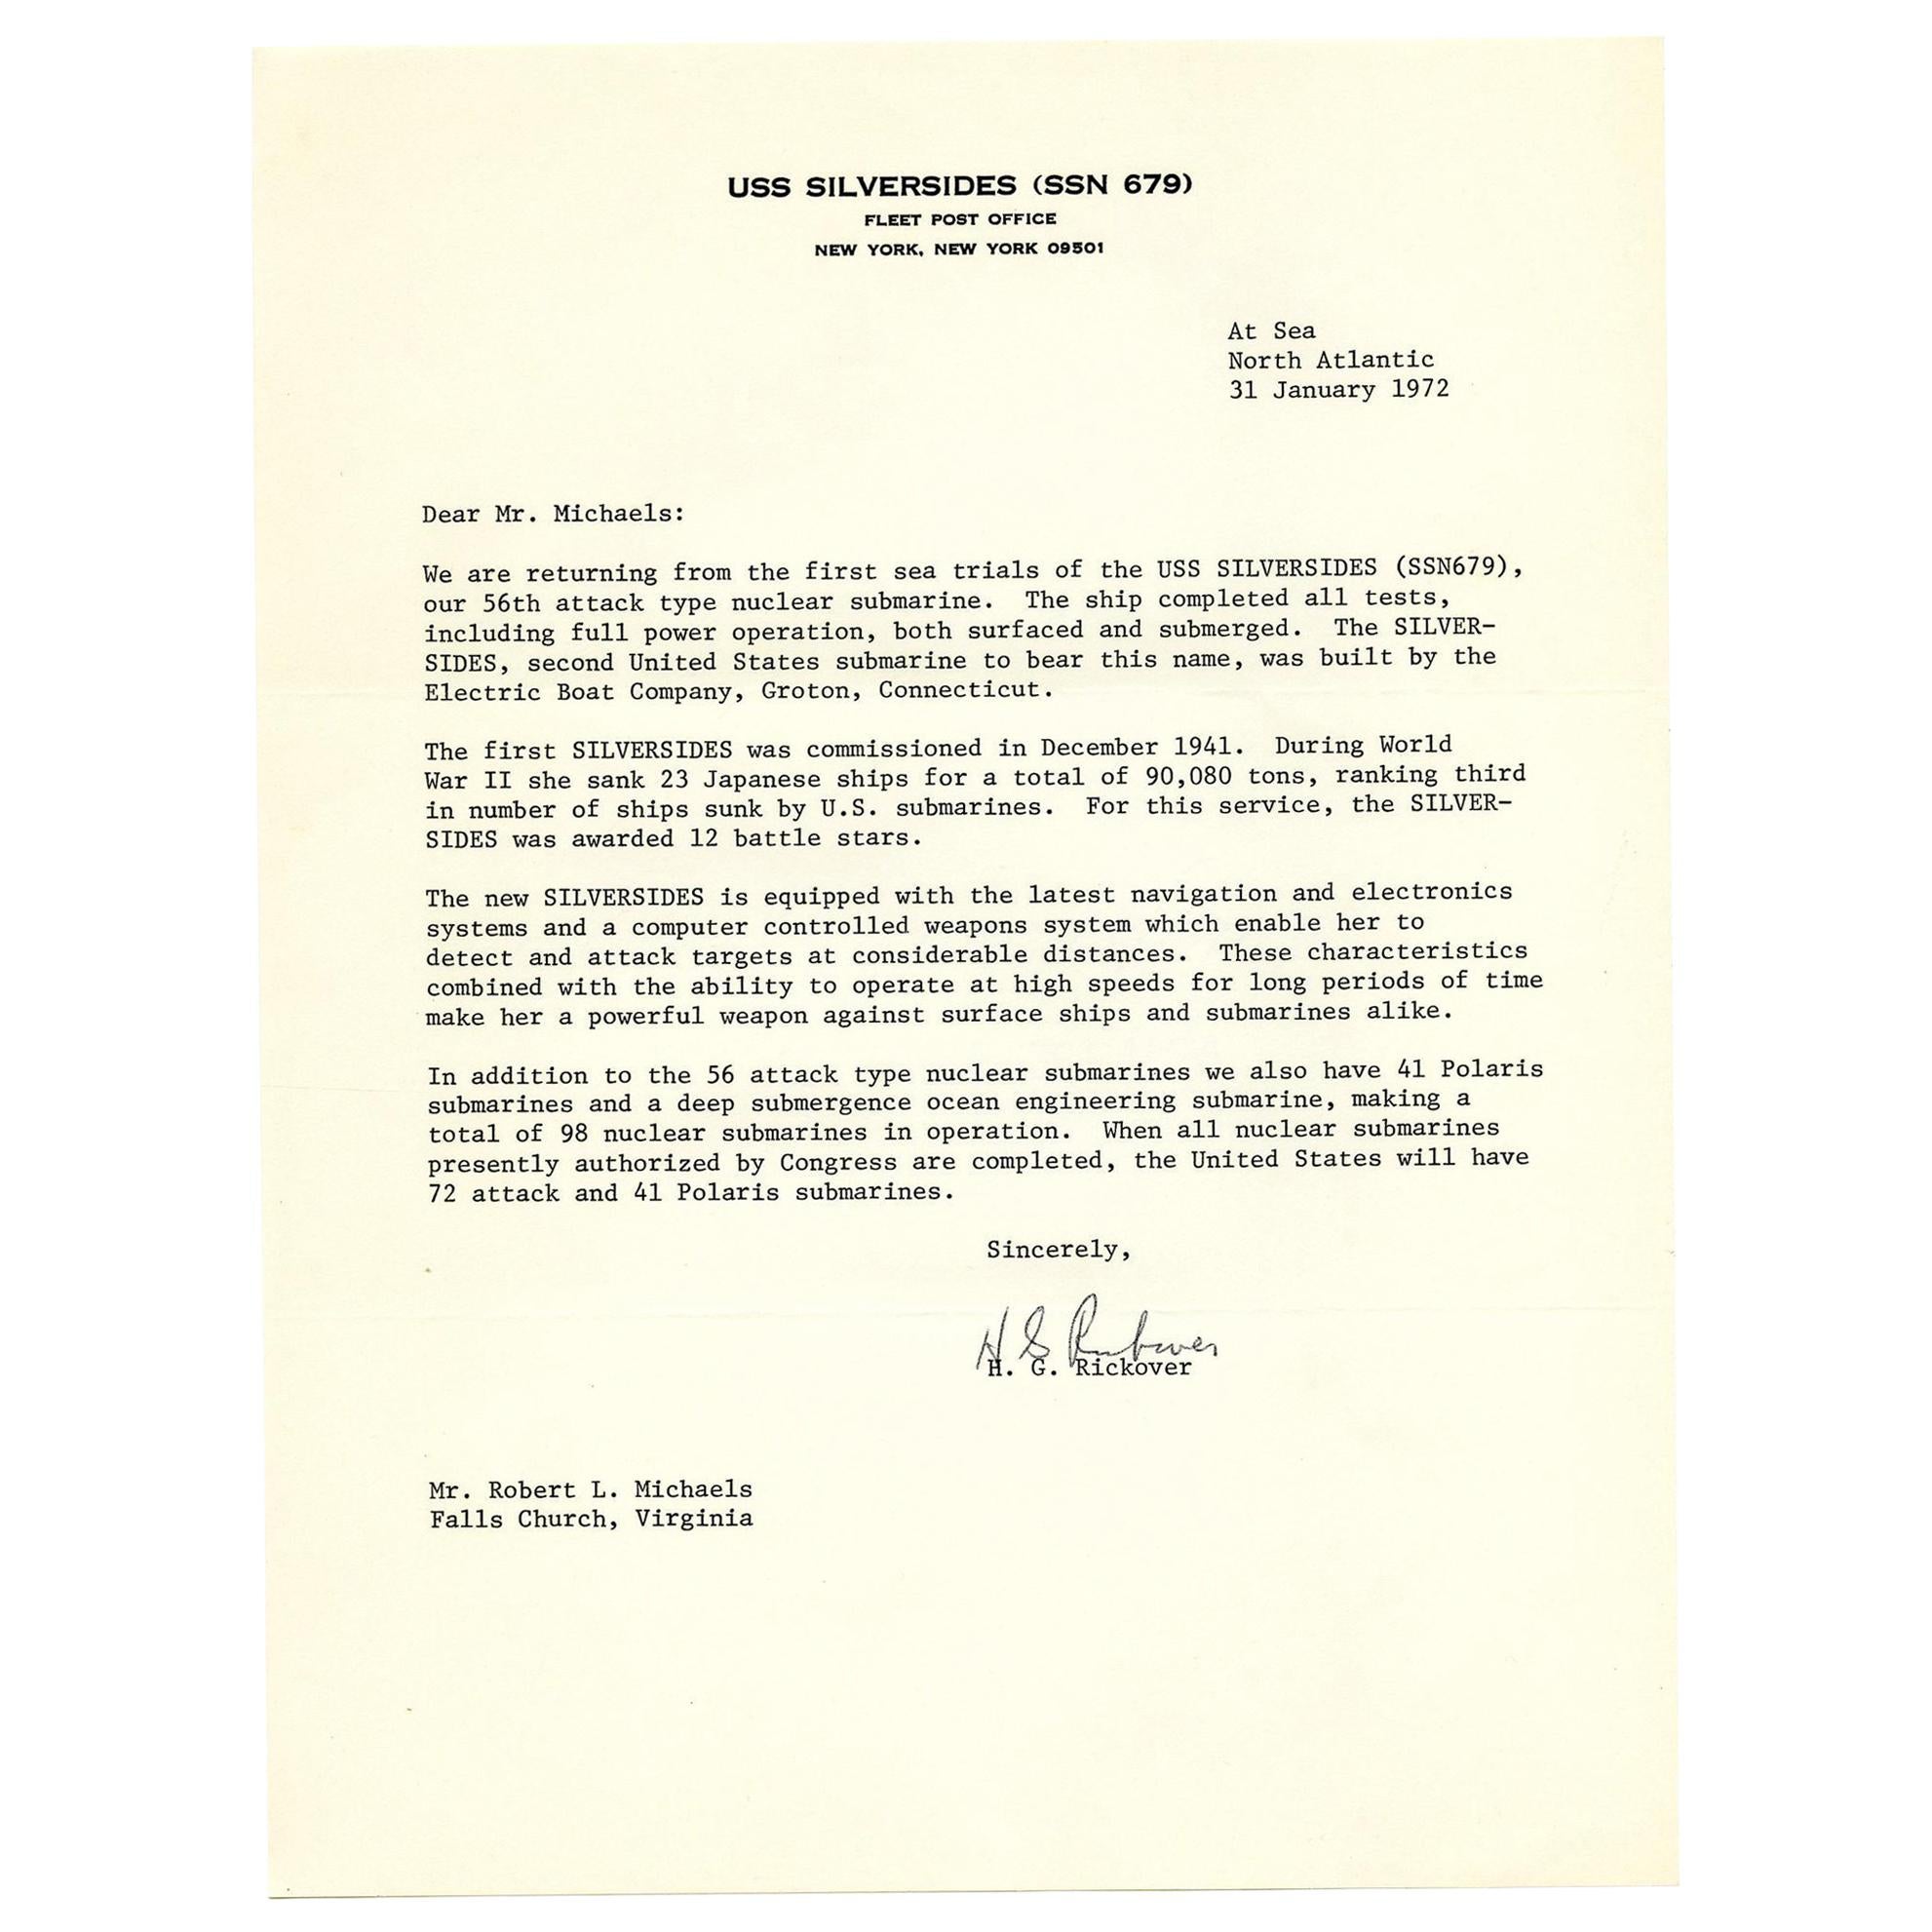 Hyman G. Rickover Signed Letter to Robert L. Michaels, Exceptional Content, 1972 For Sale